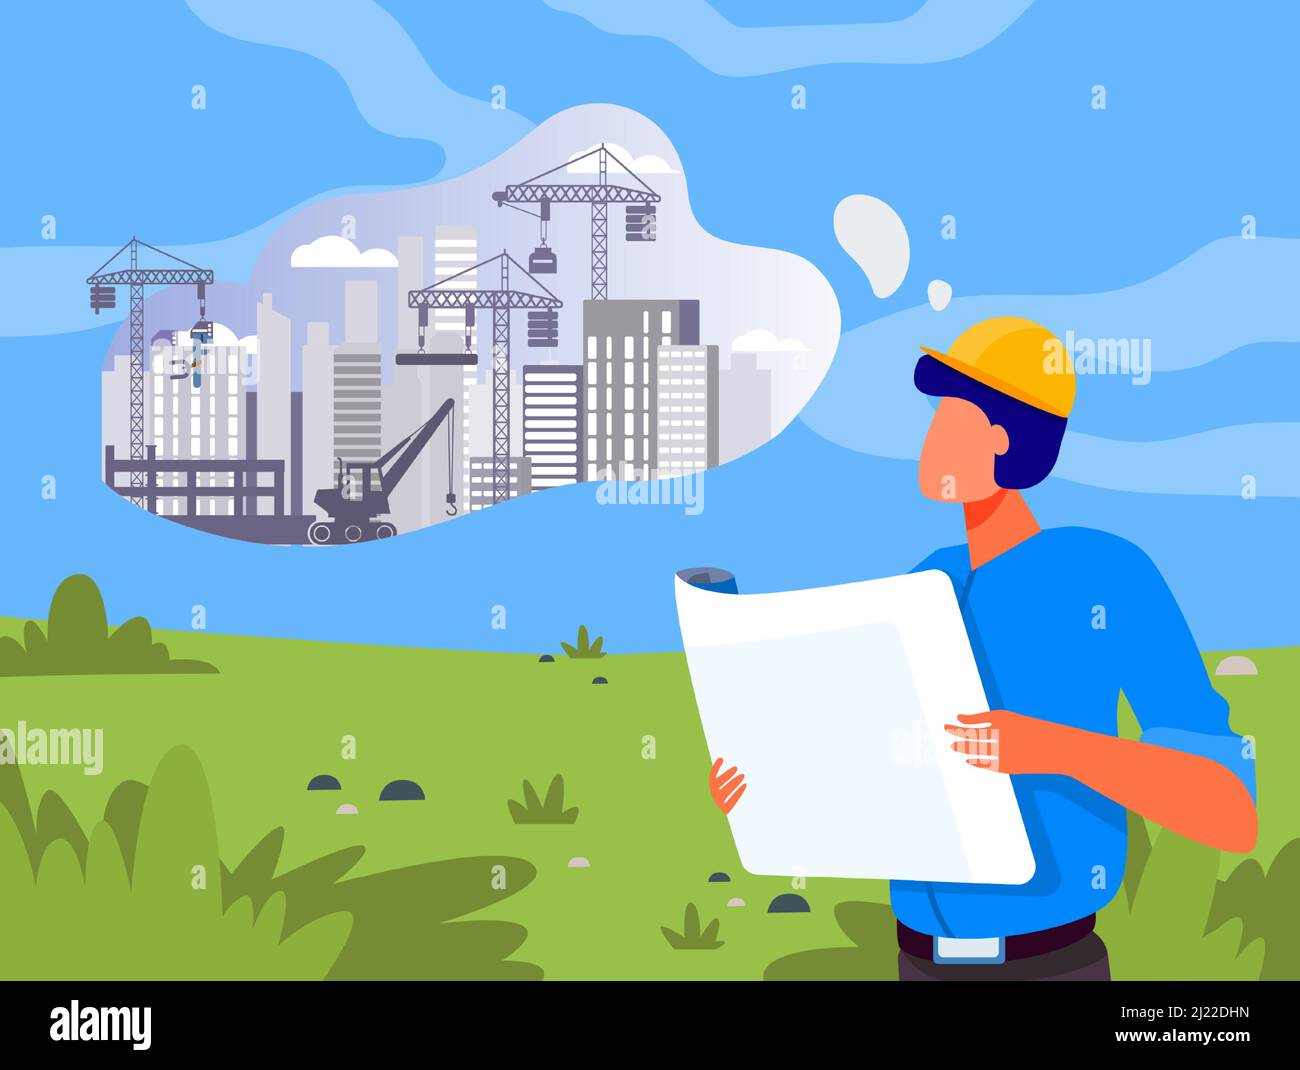 Architect with blueprint planning construction on lawn. Landscape, building work in though bubble flat vector illustration. Real estate, job concept f Stock Vector